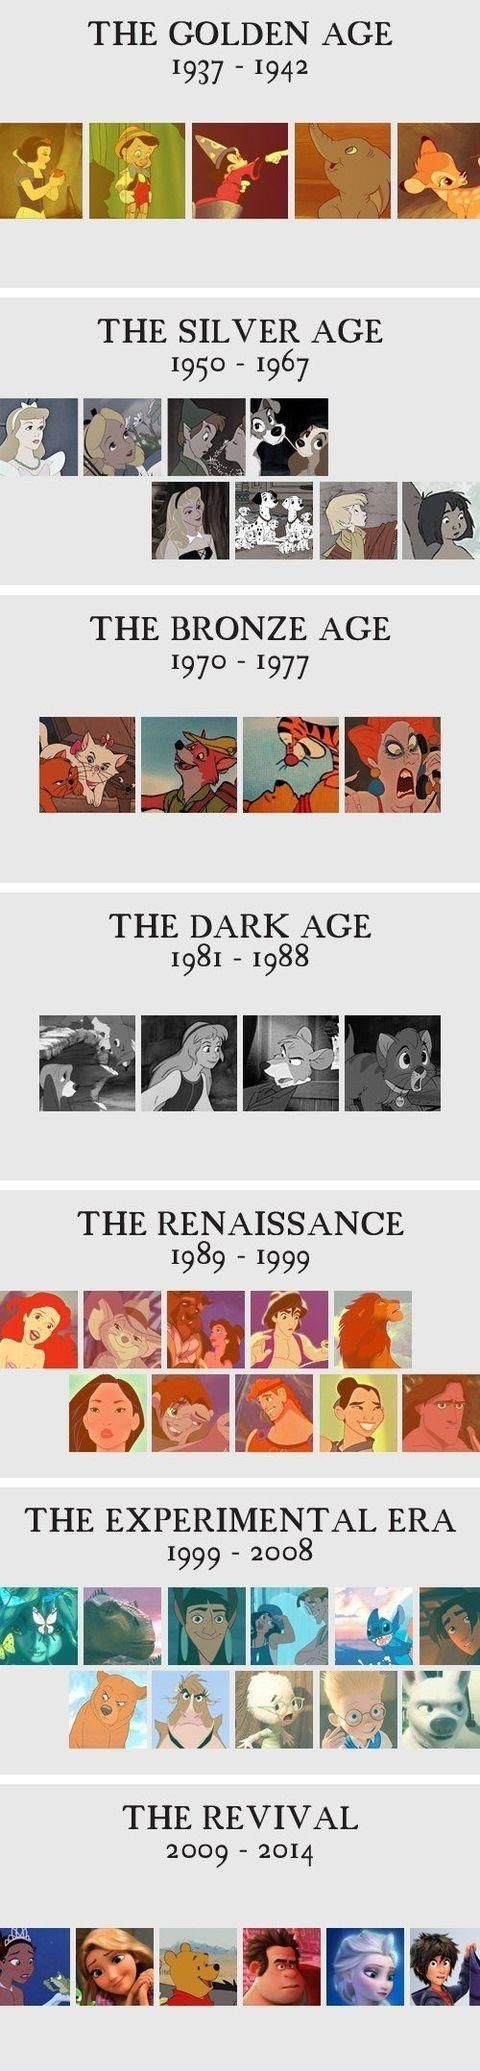 ages of disney - The Golden Age 1937 1942 The Silver Age 1950 1967 Or The Bronze Age 1970 1977 The Dark Age 1981 1988 The Renaissance 1989 1999 The Experimental Era 1999 2008 The Revival 2009 2014 12